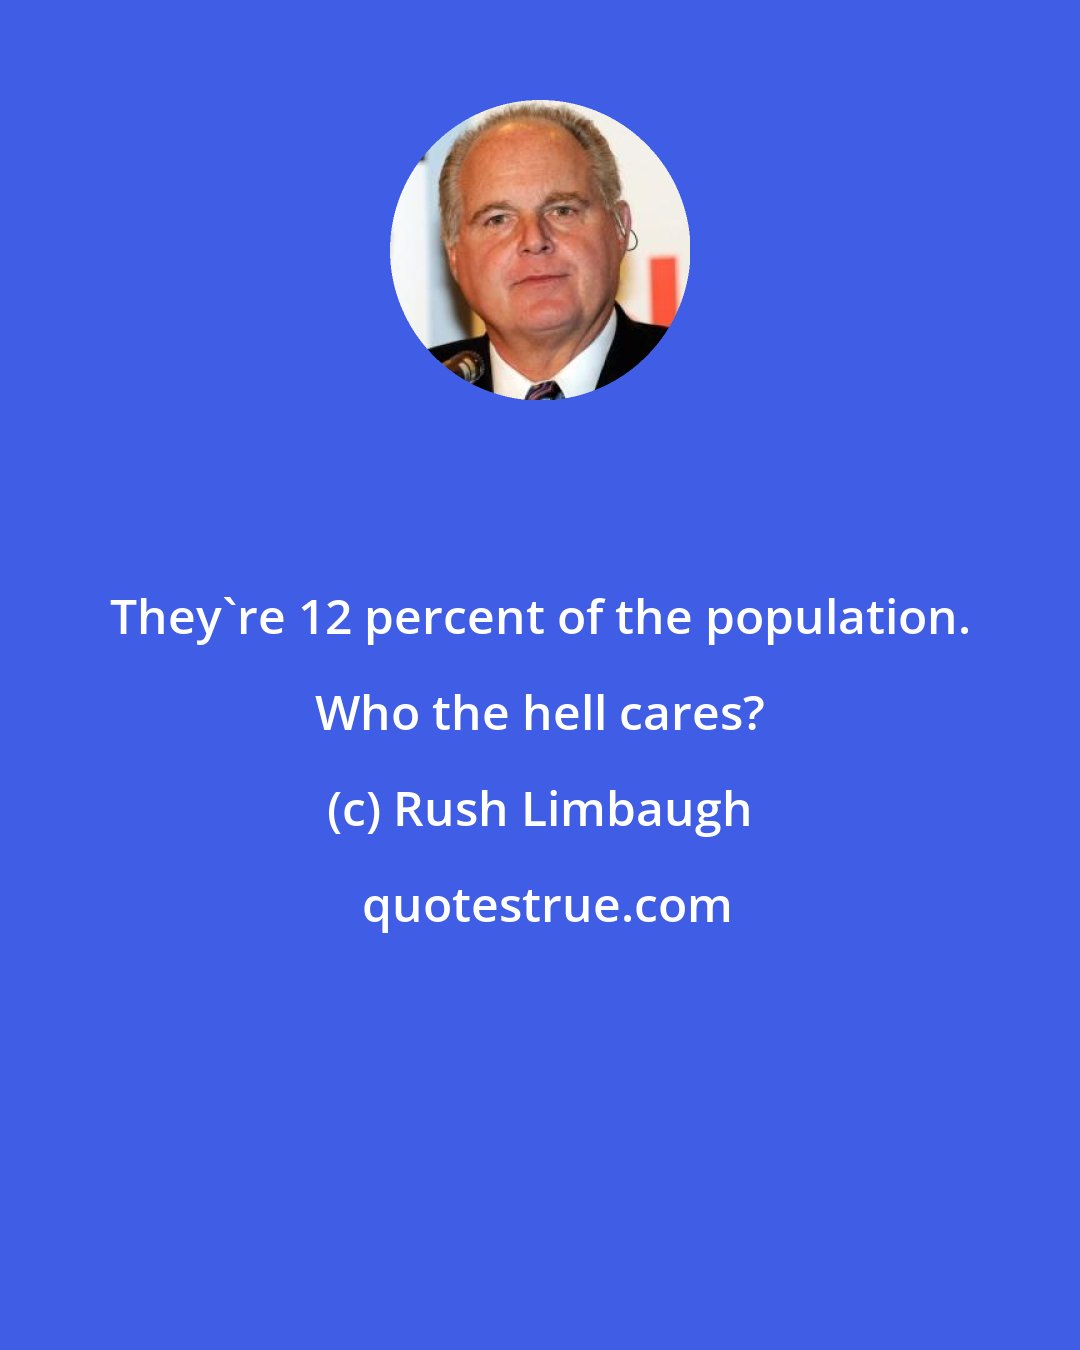 Rush Limbaugh: They're 12 percent of the population. Who the hell cares?